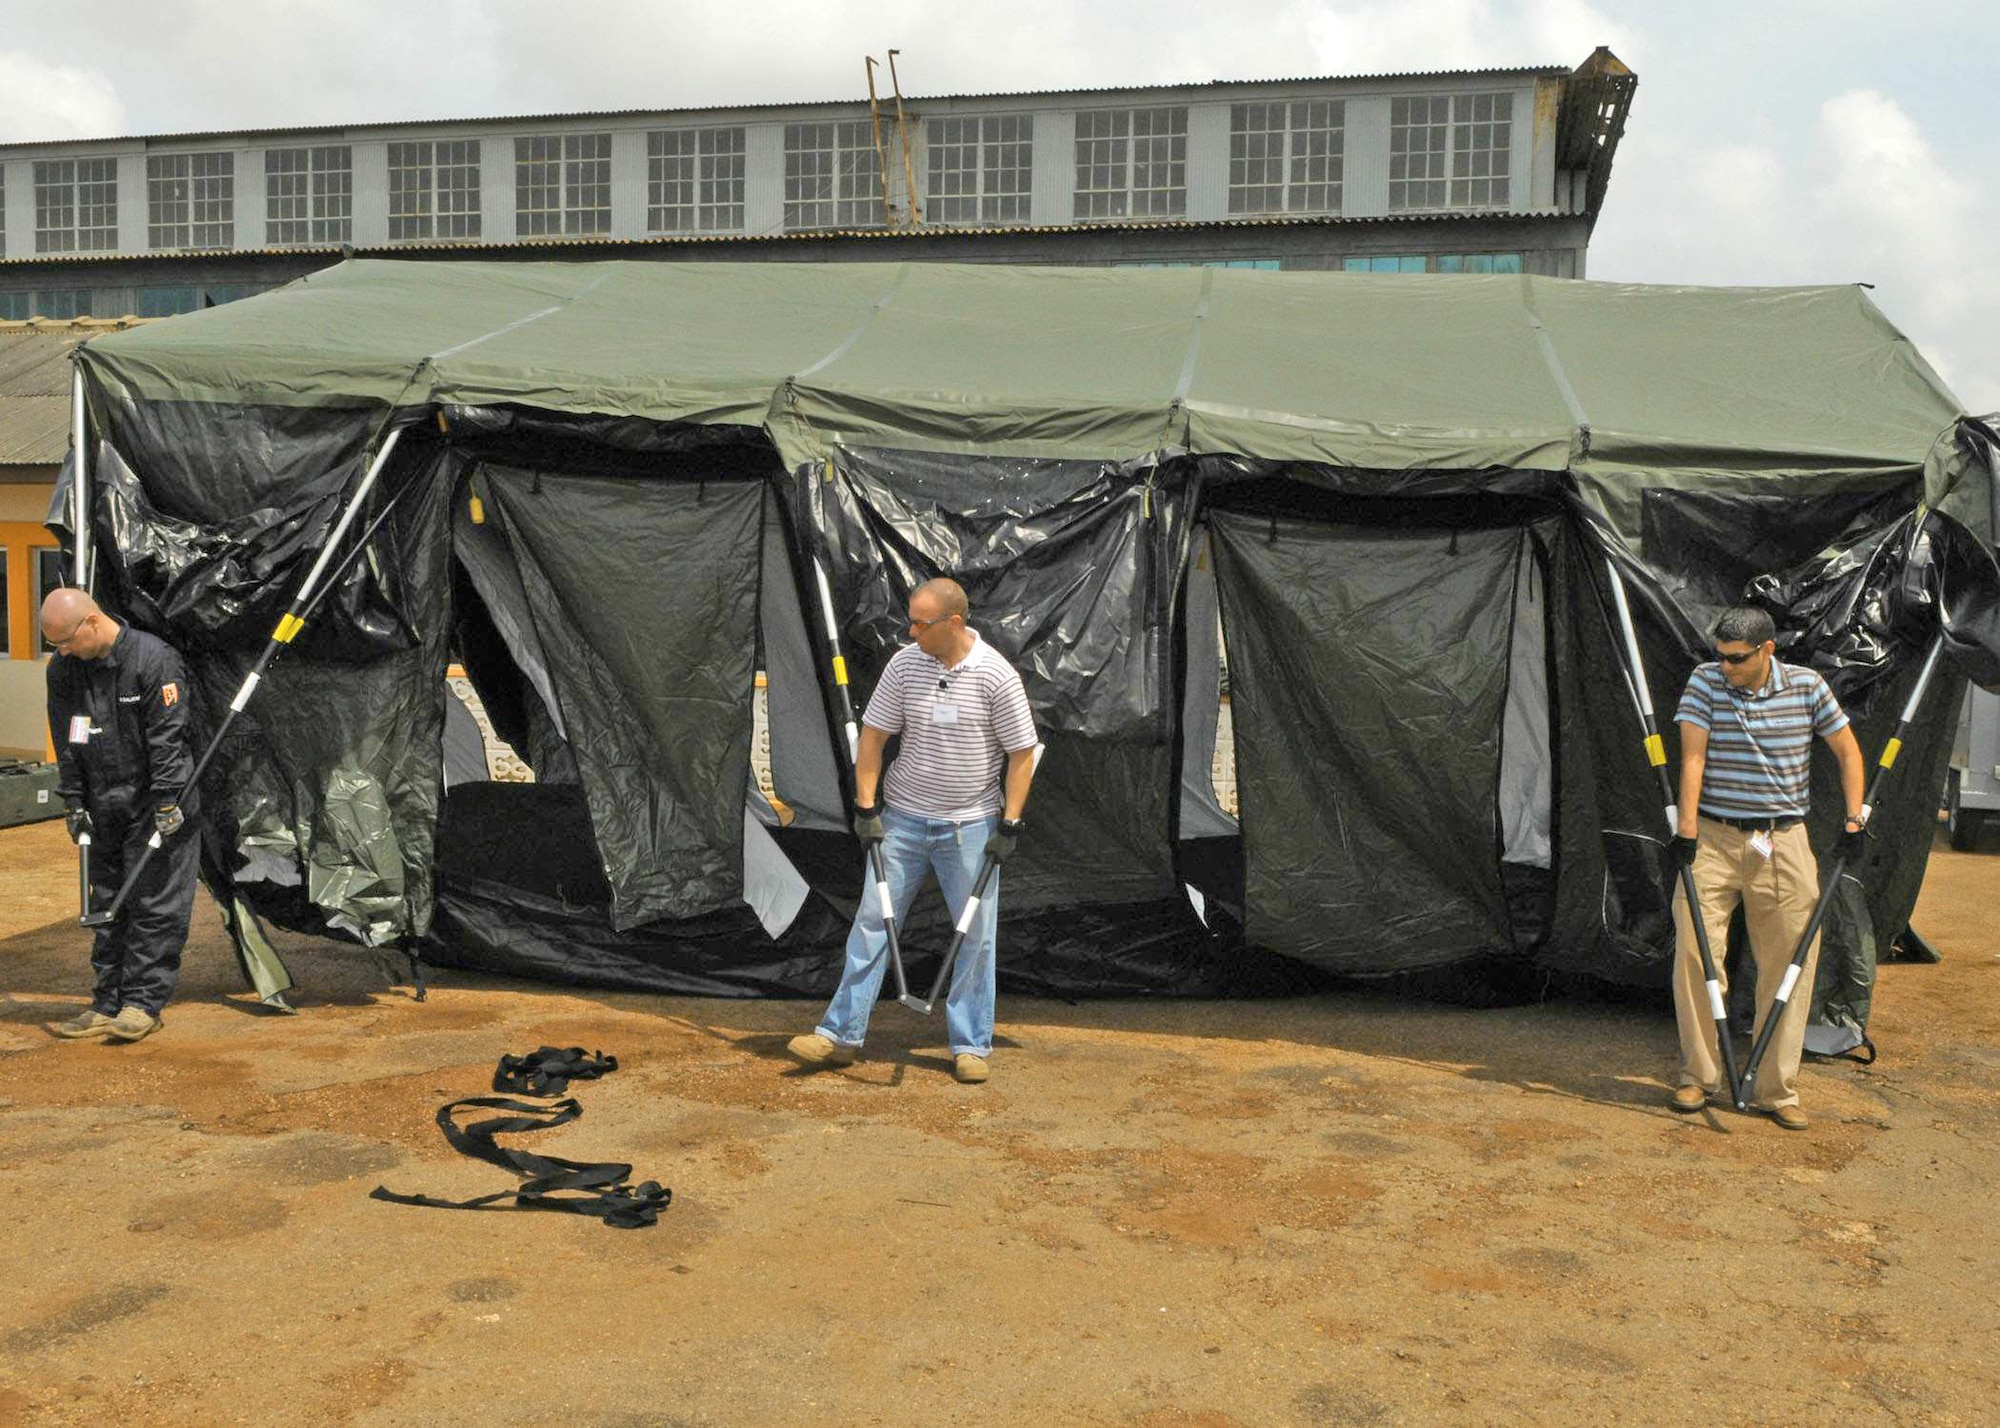 Staff James Townes, Tech. Sgt. Tracy Curtis and Capt. Daniel Hervas set up a tent at Kotoka International Airport July 1 at Accra, Ghana. The Airmen are among more than 150 Airmen, Sailors and Marines in Ghana and Sailors aboard the USS Iwo Jima who form a task force supporting President Barack Obama's visit July 10 and 11. Sergeant Townes is assigned to the 1st Combat Communications Squadron from Ramstein Air Base, Germany. Sergeant Curtis is assigned to the 621st Contingency Response Wing from McGuire Air Force Base, N.J. Captain Hervas is assigned to the 39th Logistics Readiness Squadron at Incirlik Air Base, Turkey/ (U.S. Air Force photo/Master Sgt. Jim Fisher) 